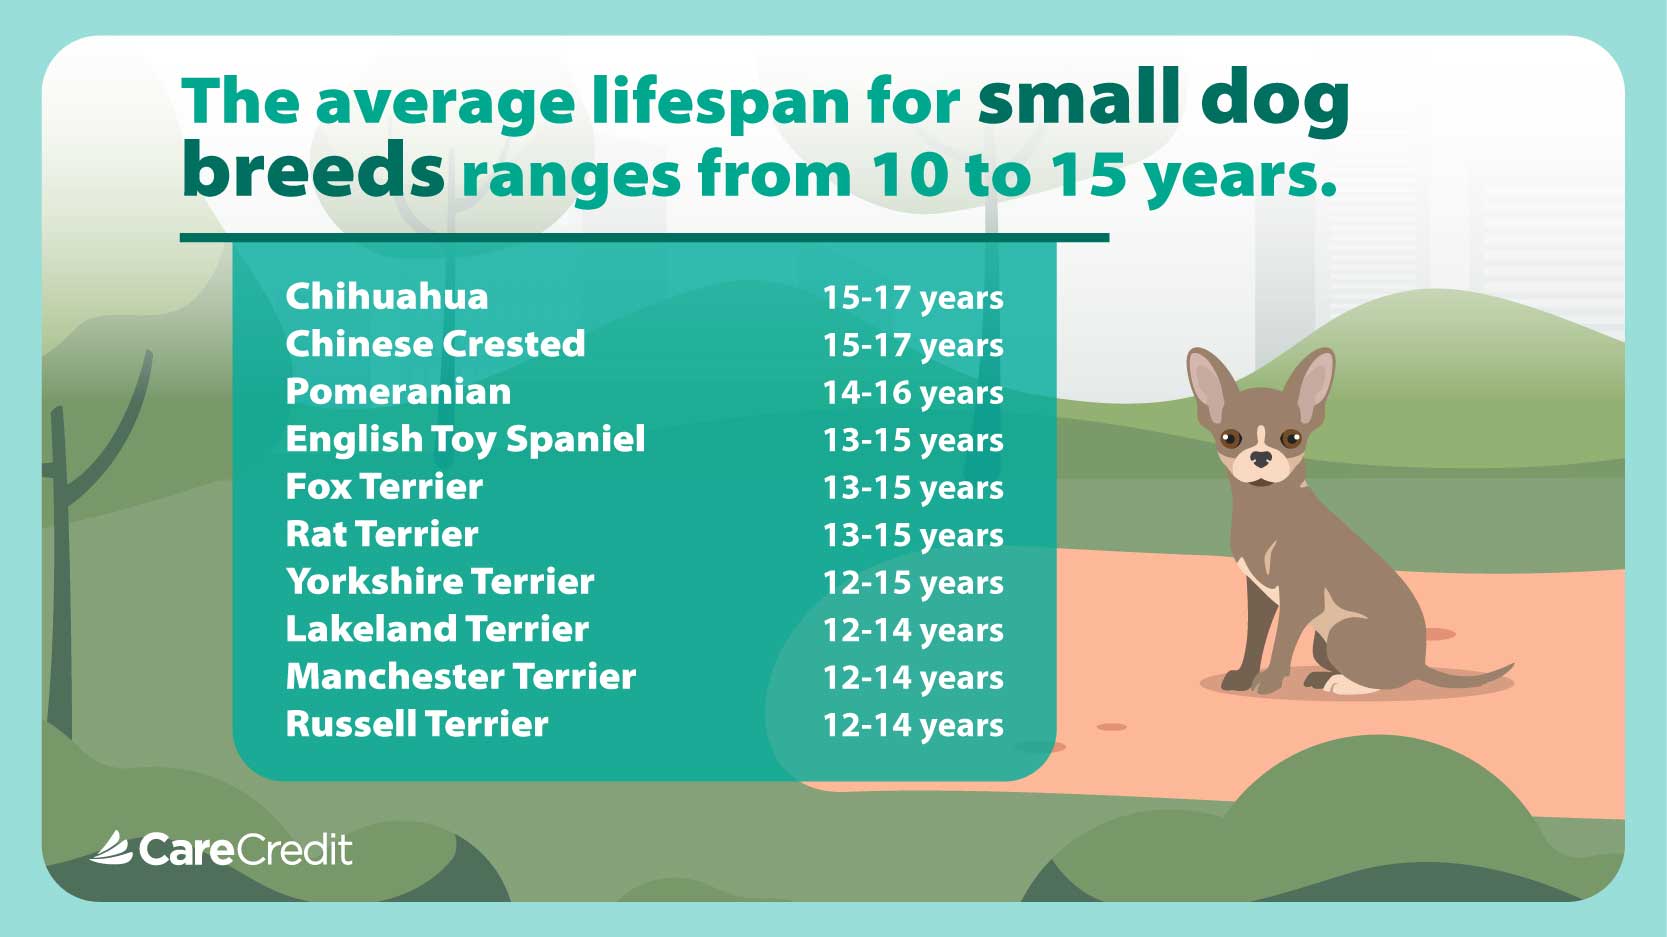 The average lifespan for small dog breeds ranges from 10 to 15 years.